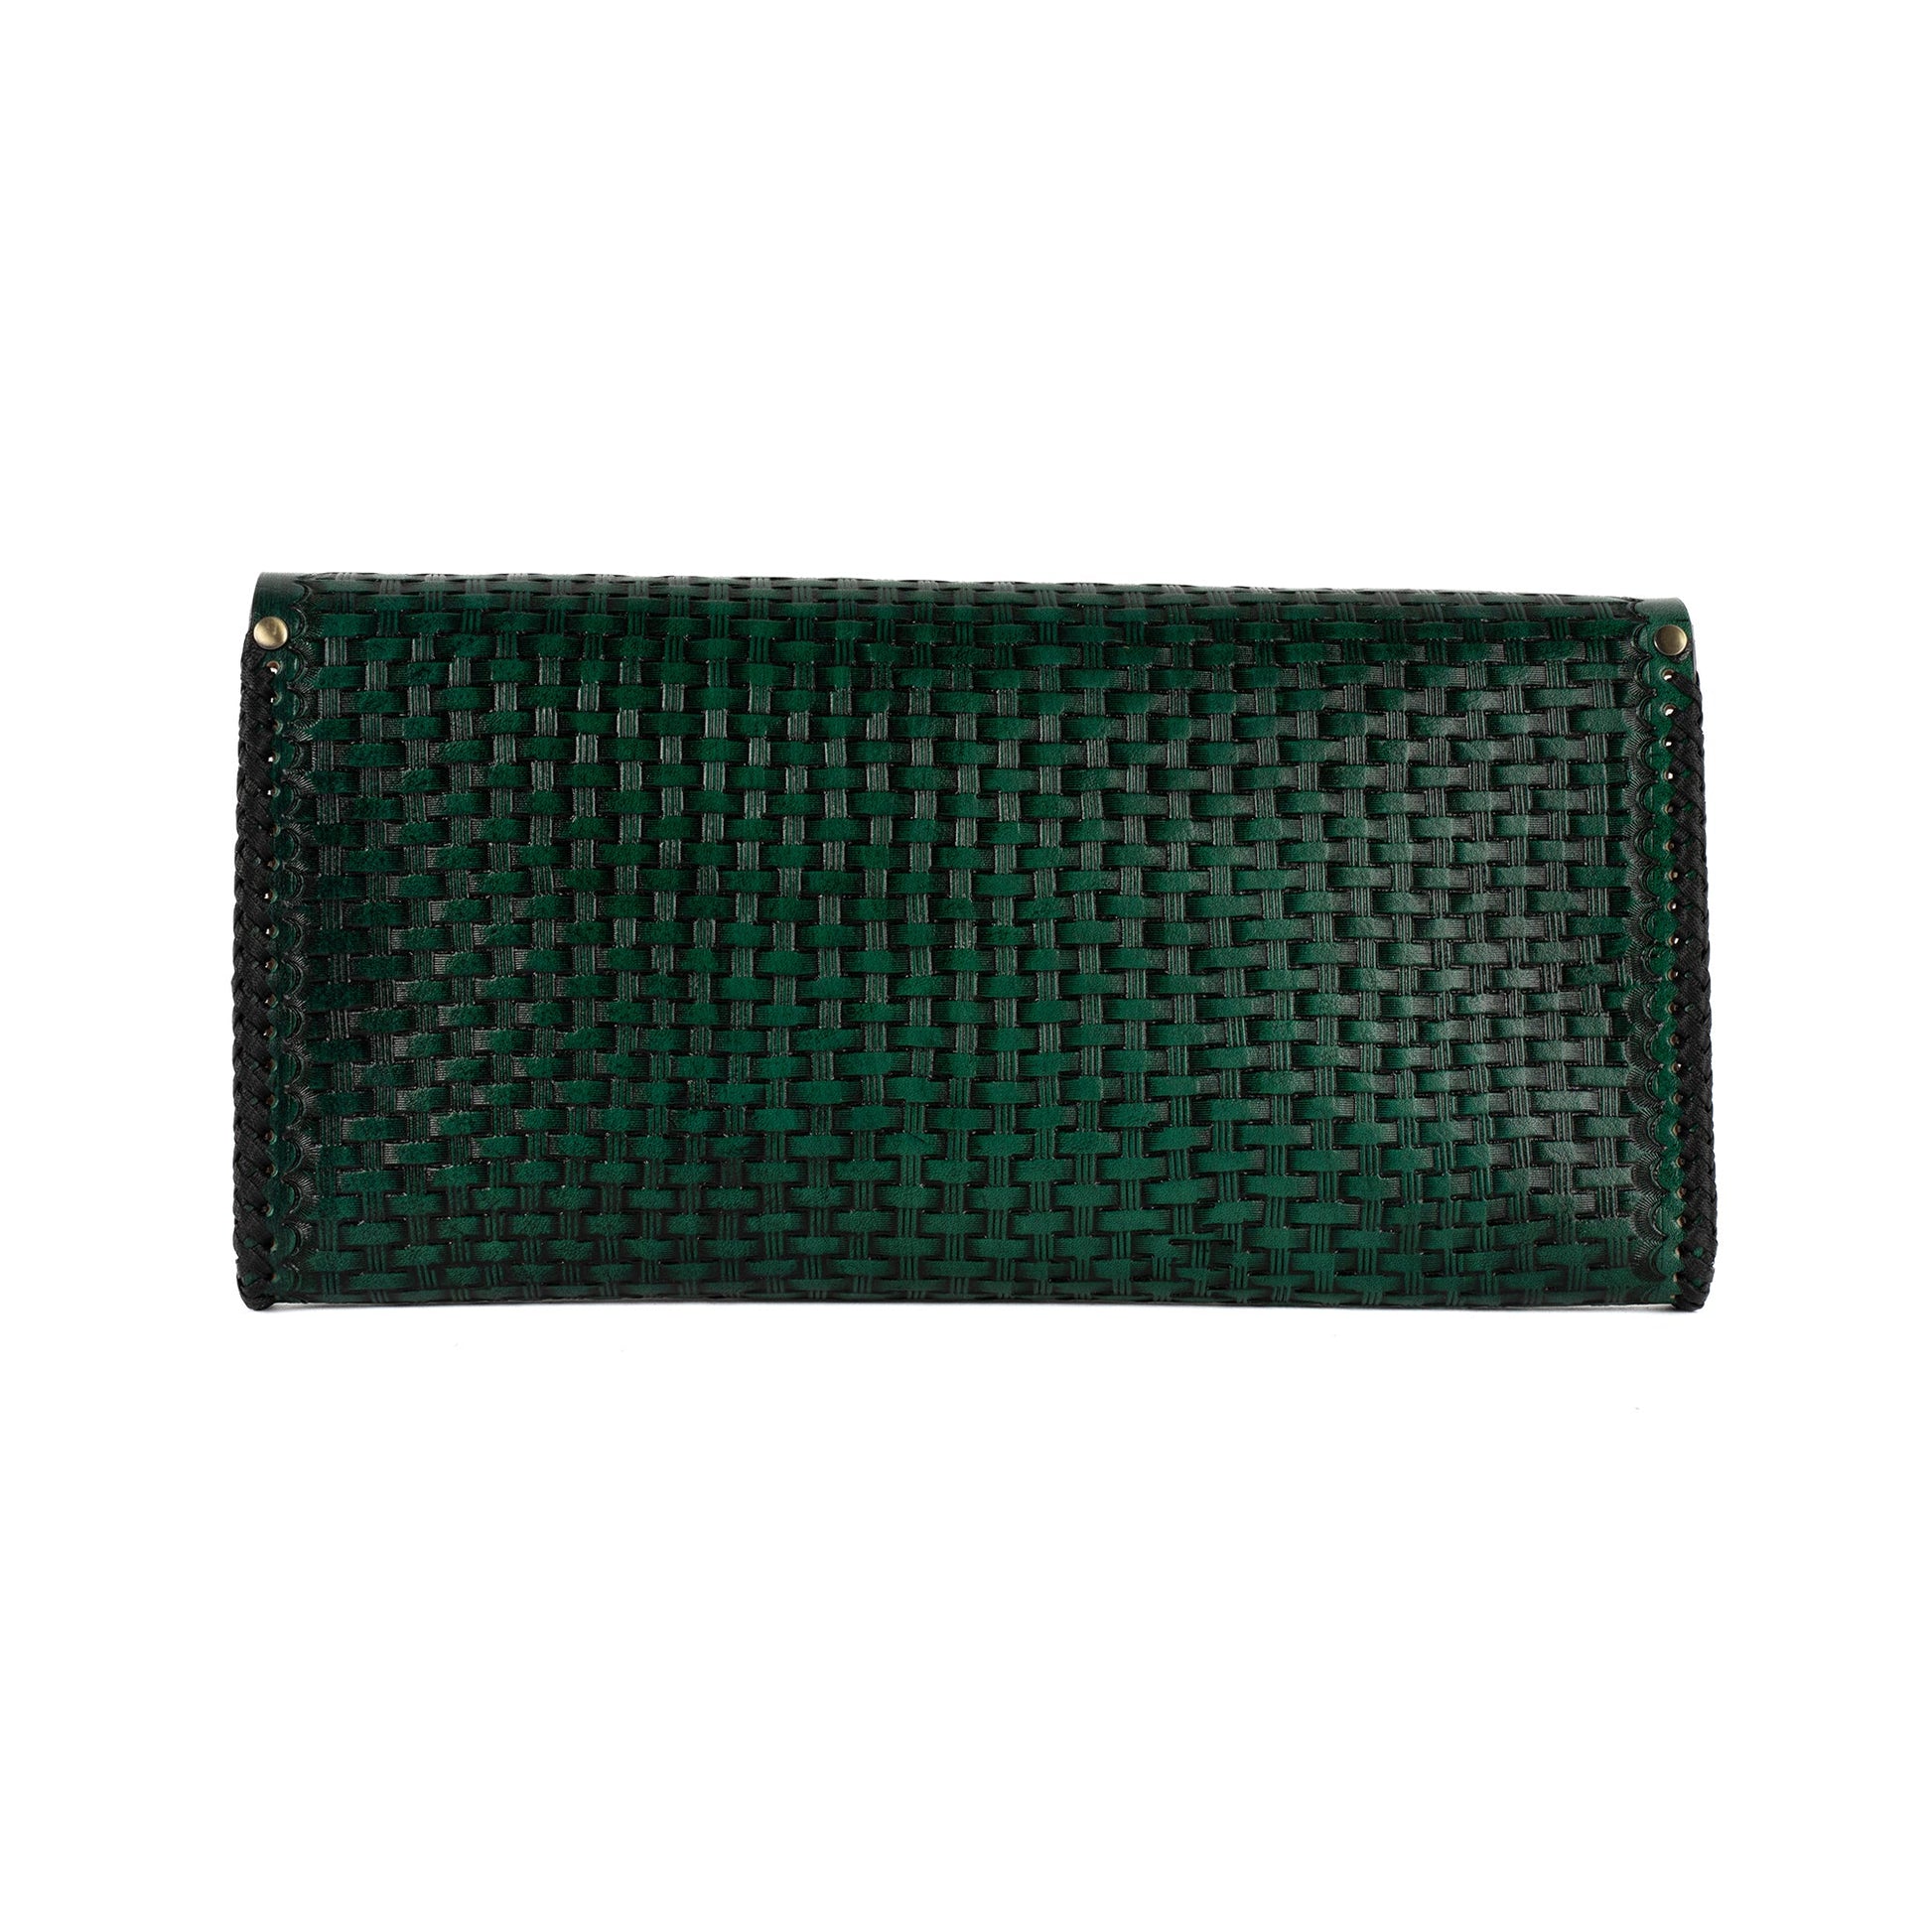 Hypodelphia Green Leather Carved & Crafted Hand Bag - Handbags Zengoda Shop online from Artisan Brands